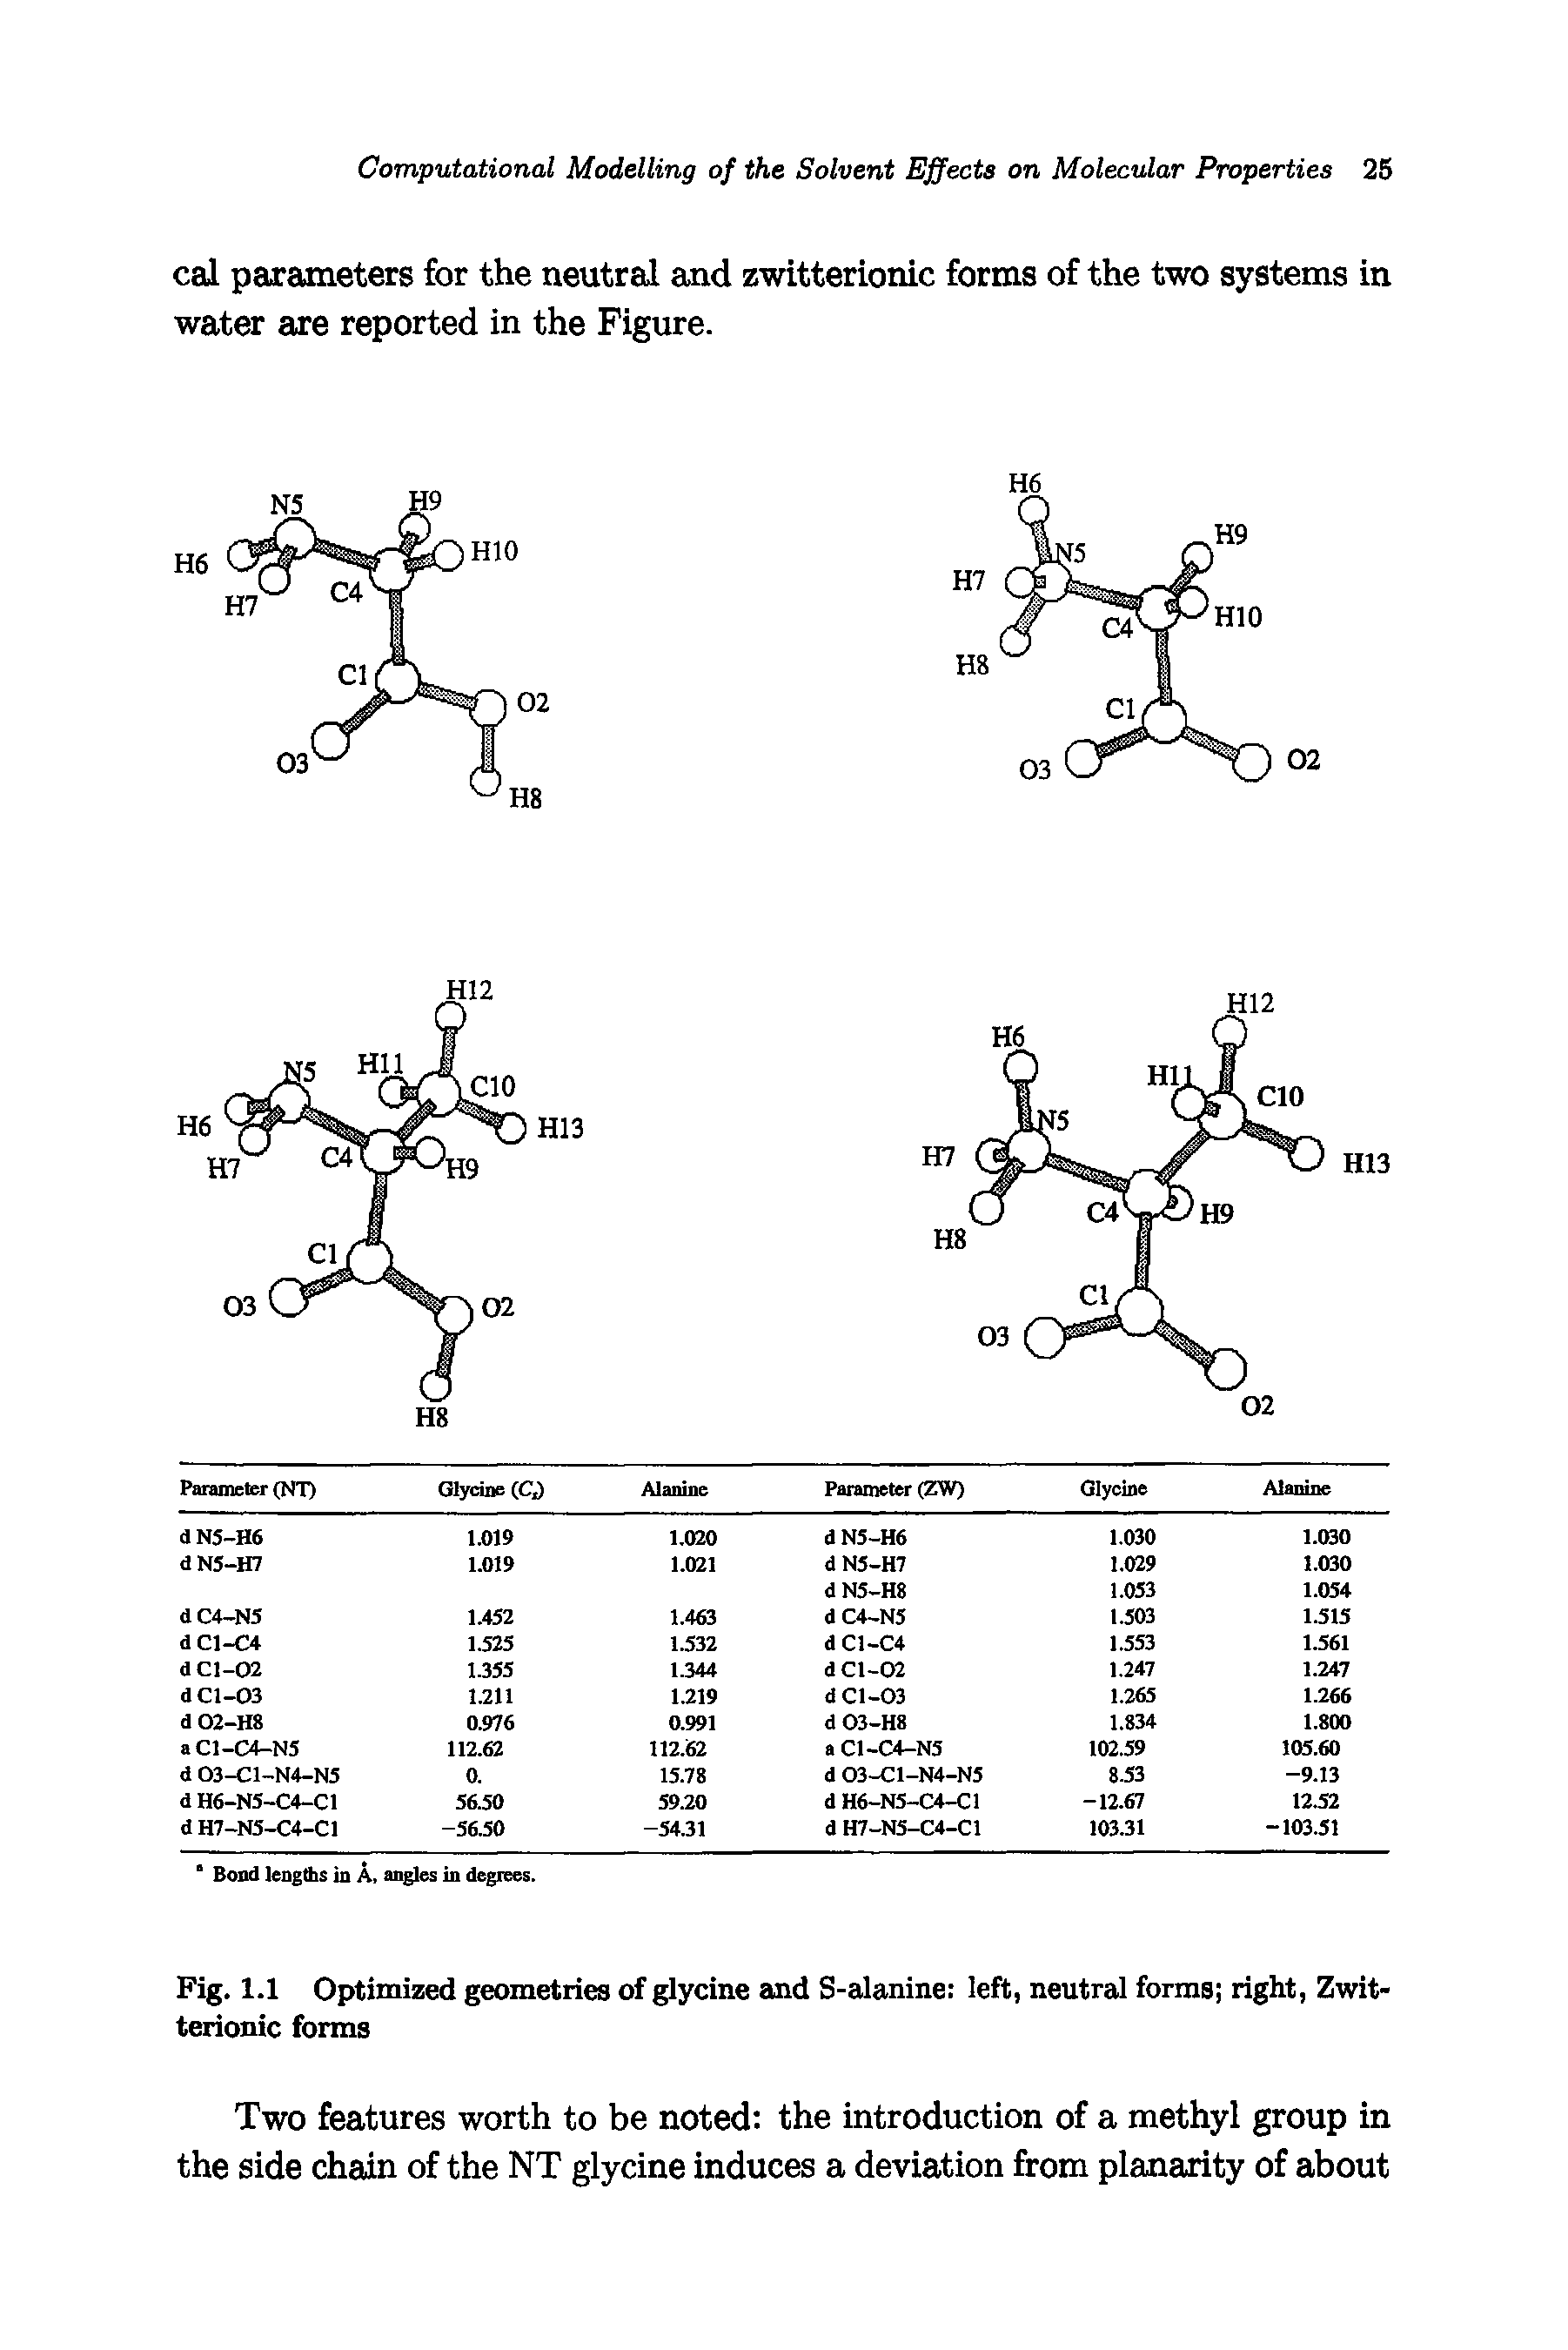 Fig. 1.1 Optimized geometries of glycine and S-alanine left, neutral forms right, Zwitterionic forms...